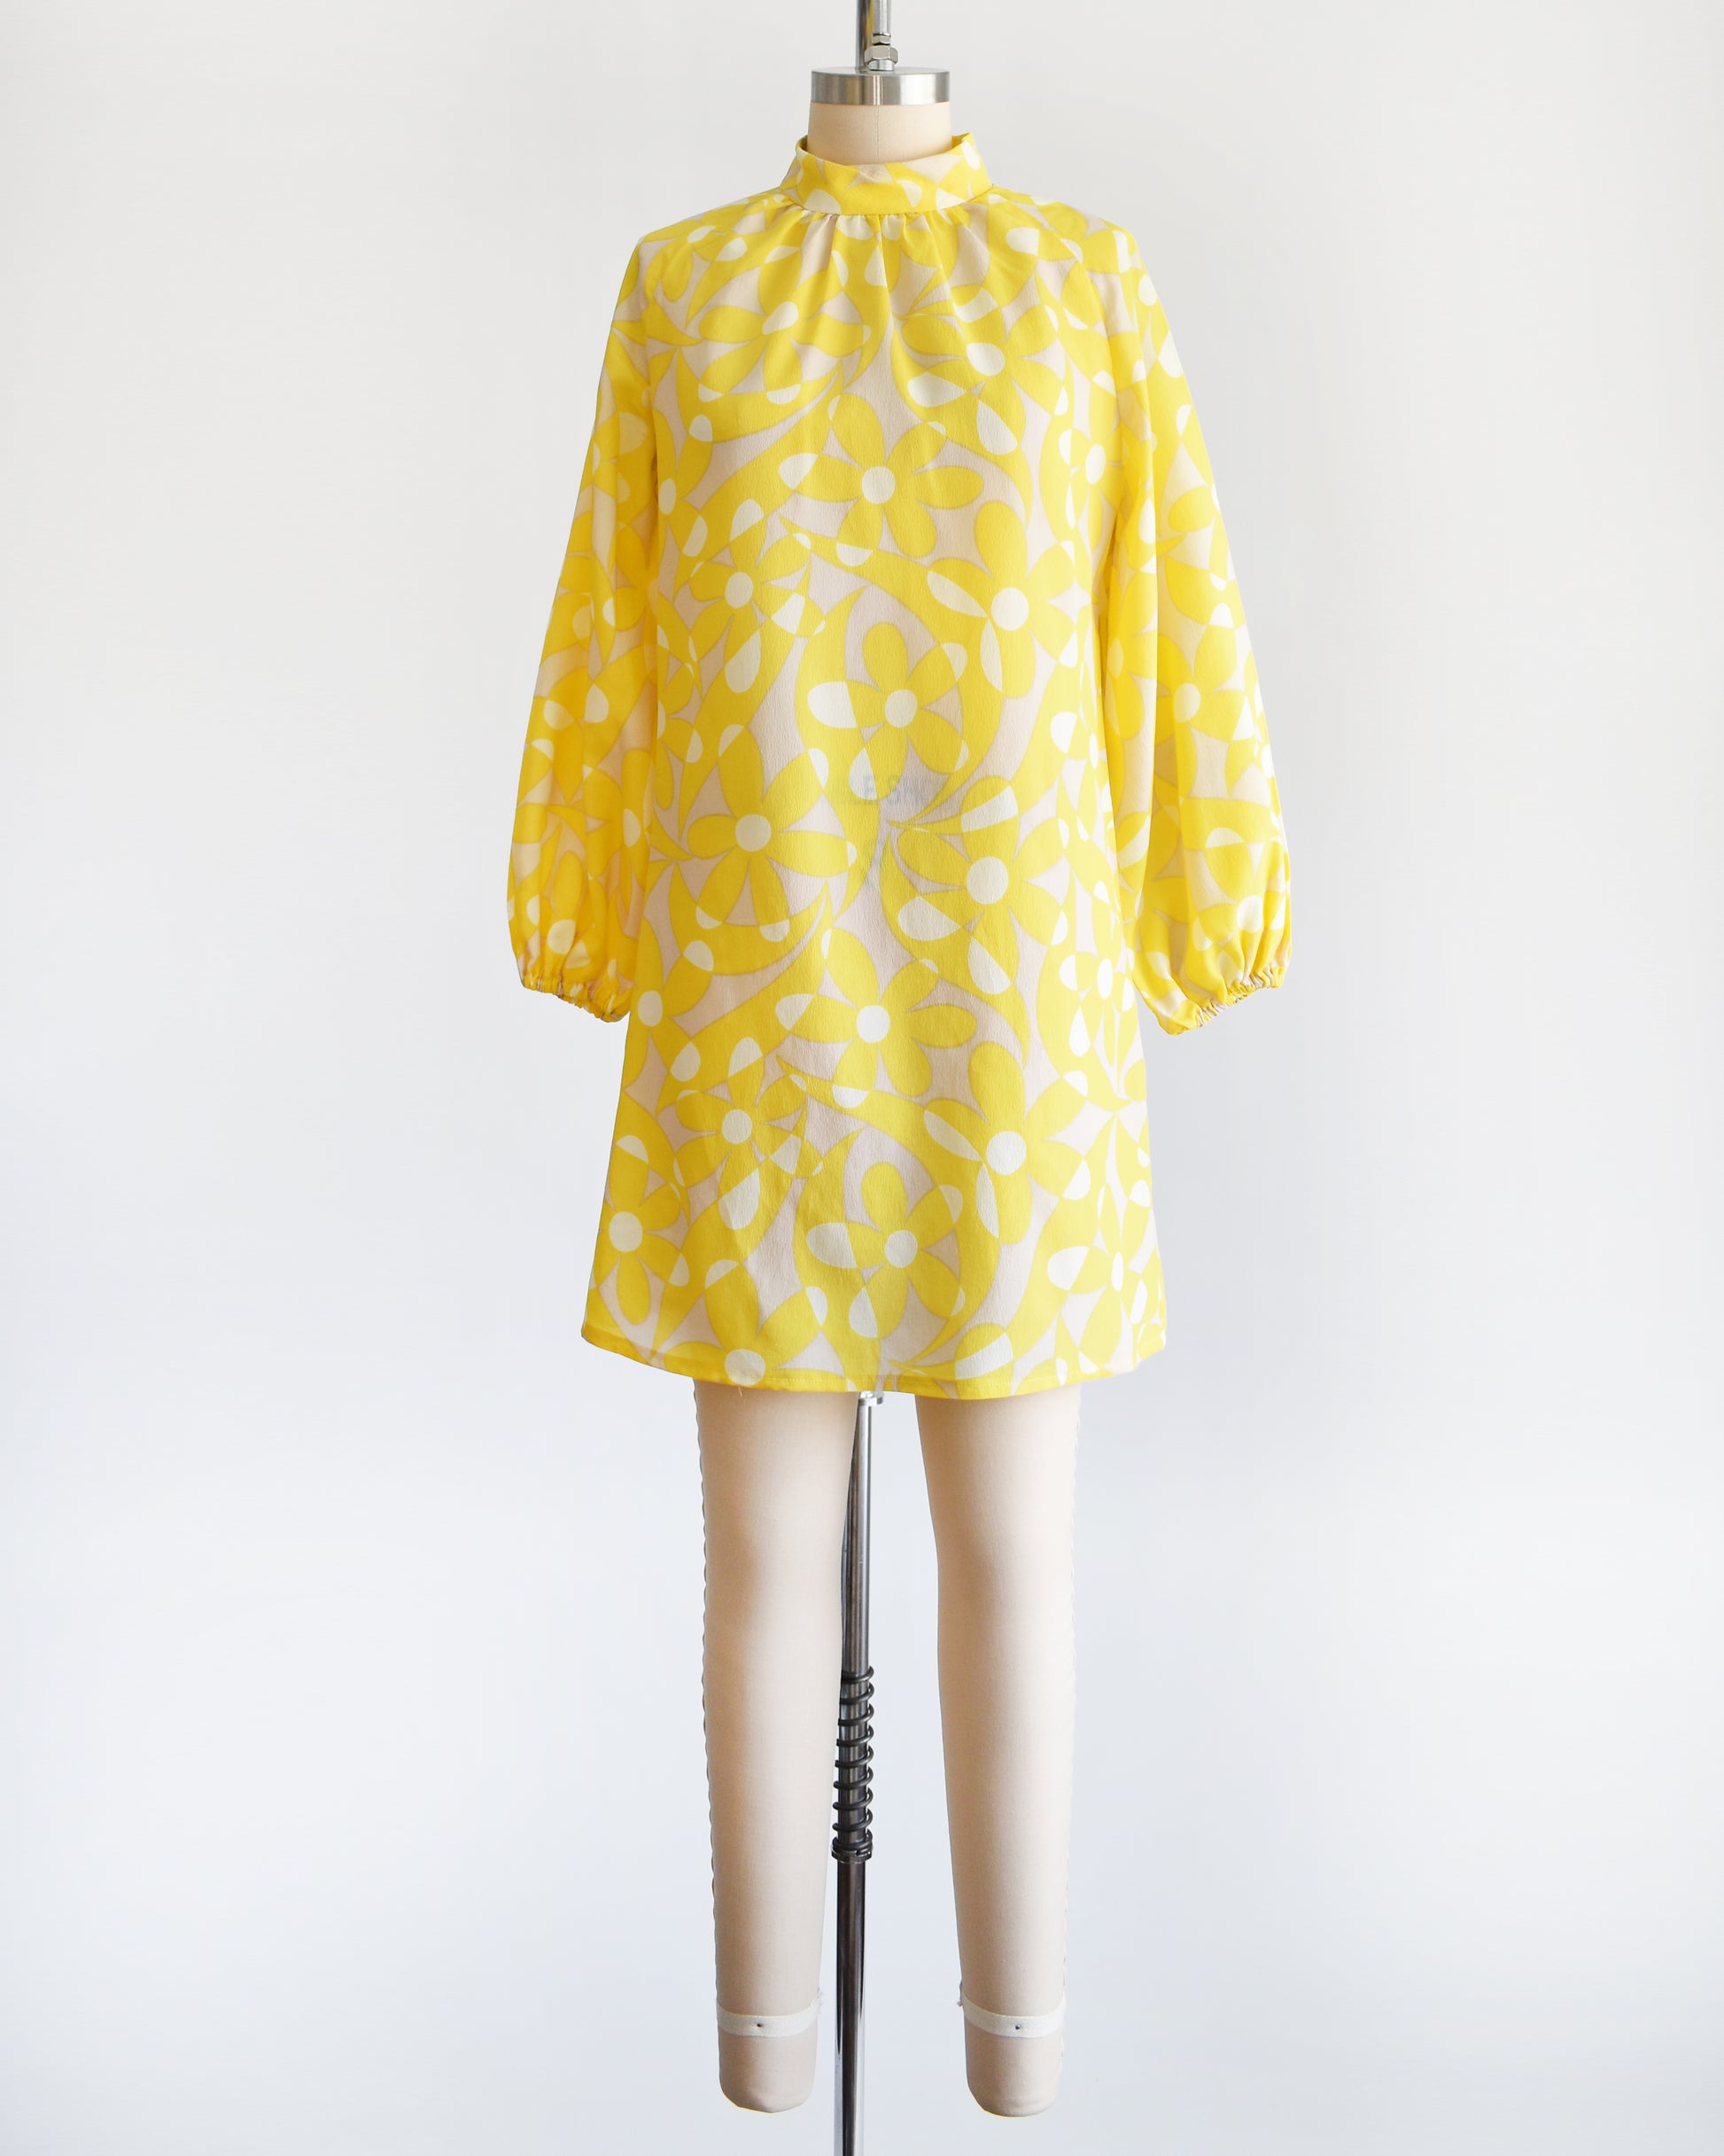 A vintage 1960s mod mini dress features a bright yellow and white floral pattern with swirls, set on a pale beige background. 